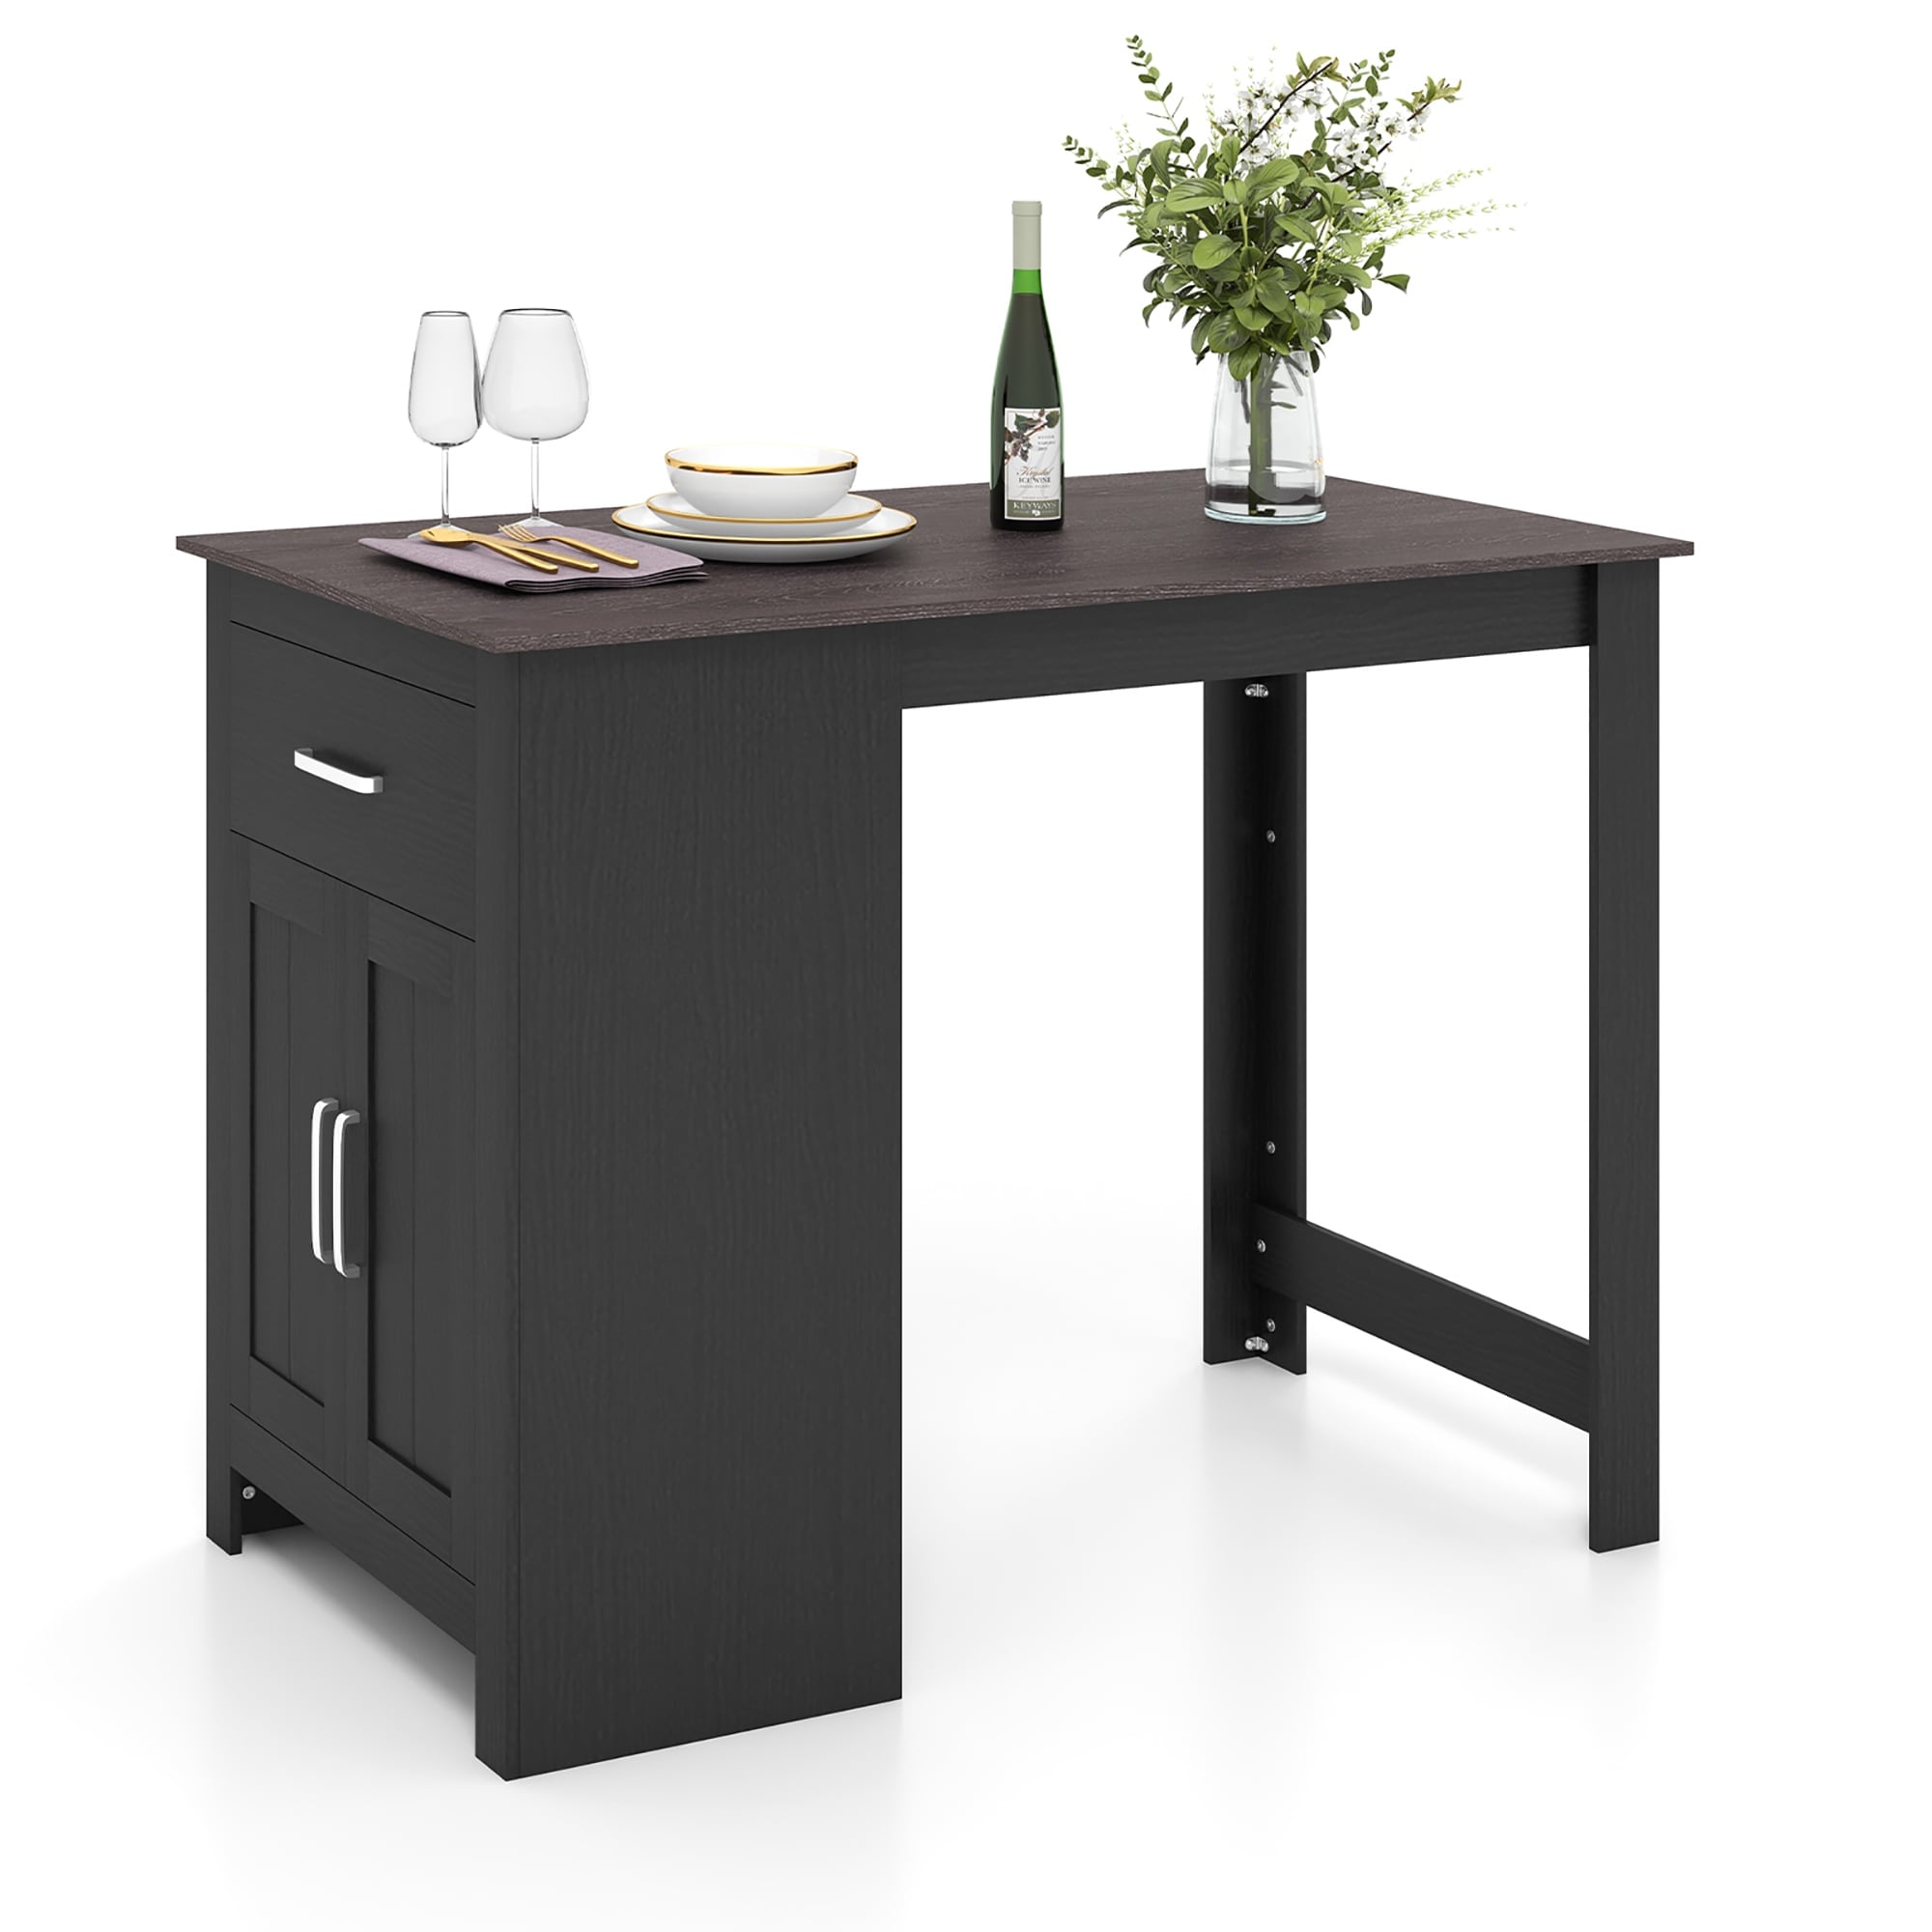 https://ak1.ostkcdn.com/images/products/is/images/direct/c1a21f5a53c7a602226366dfc447a3cb4728ac5c/Costway-Bar-Table-35.5%27%27-Counter-Height-Dining-Table-with-Storage.jpg